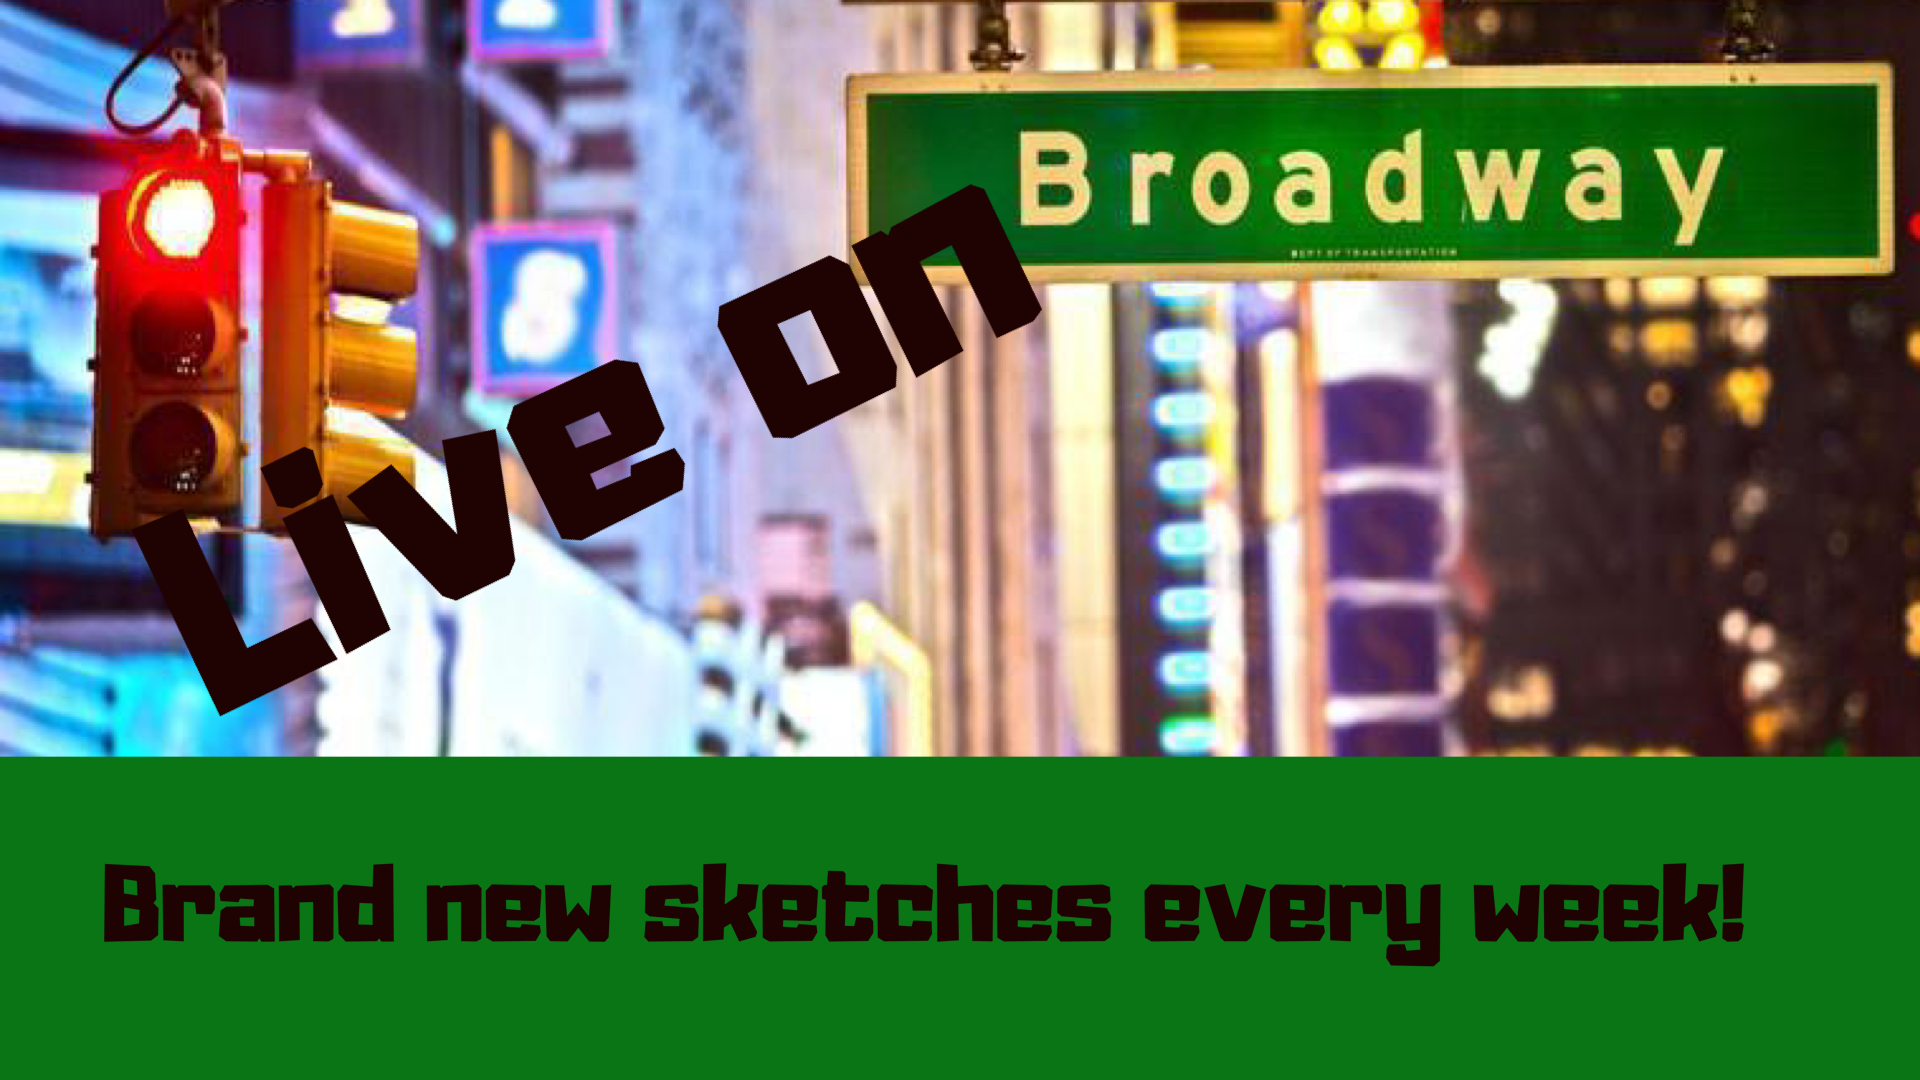 Live On Broadway: Denver's ONLY Weekly Sketch Comedy Show